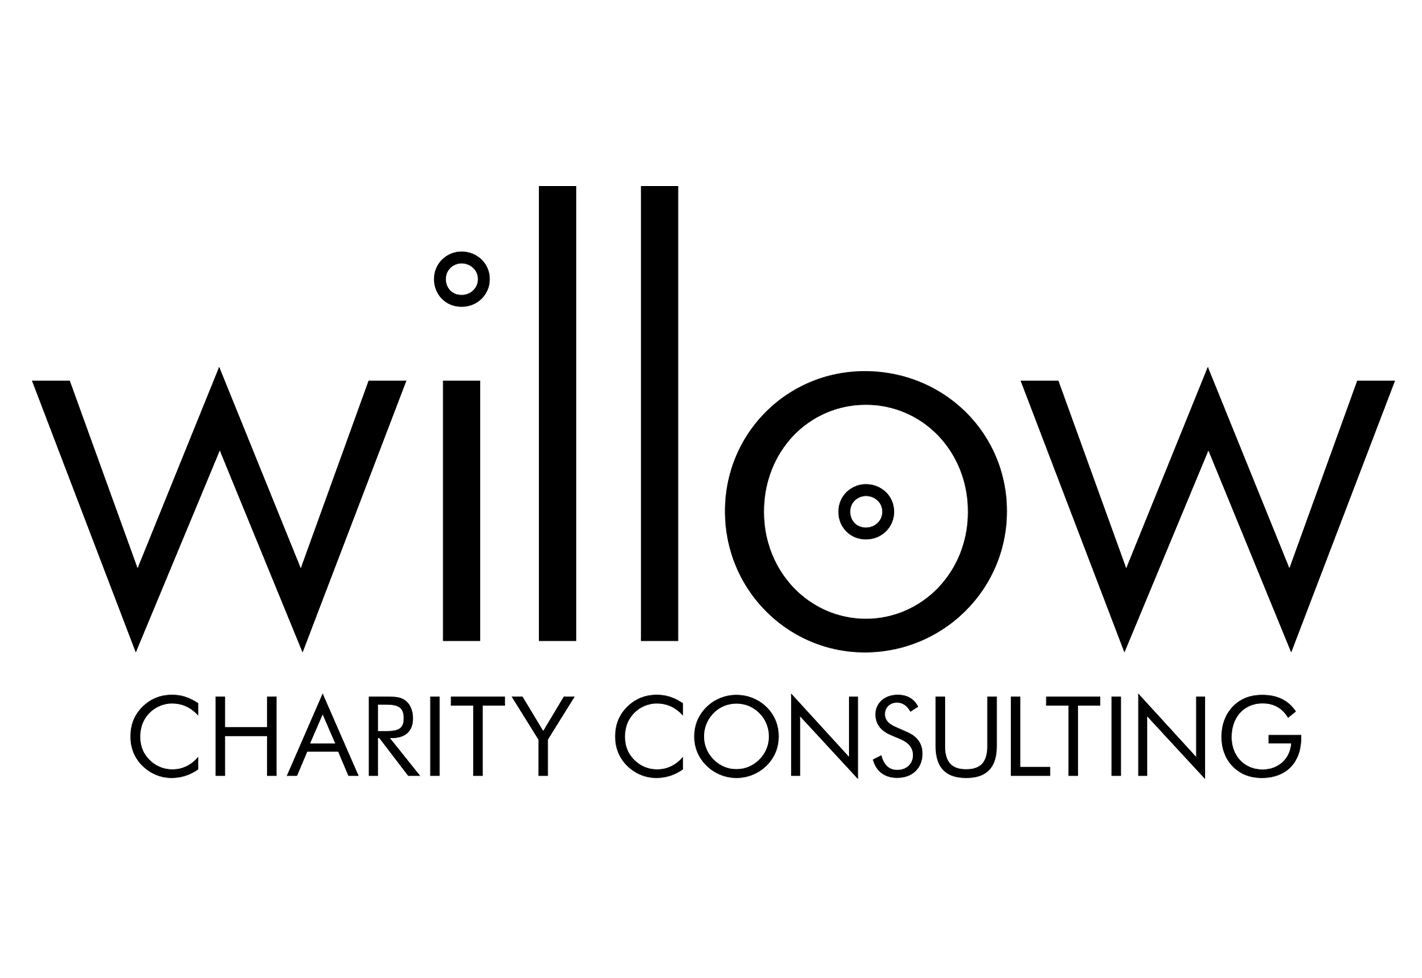 Willow Charity Consulting